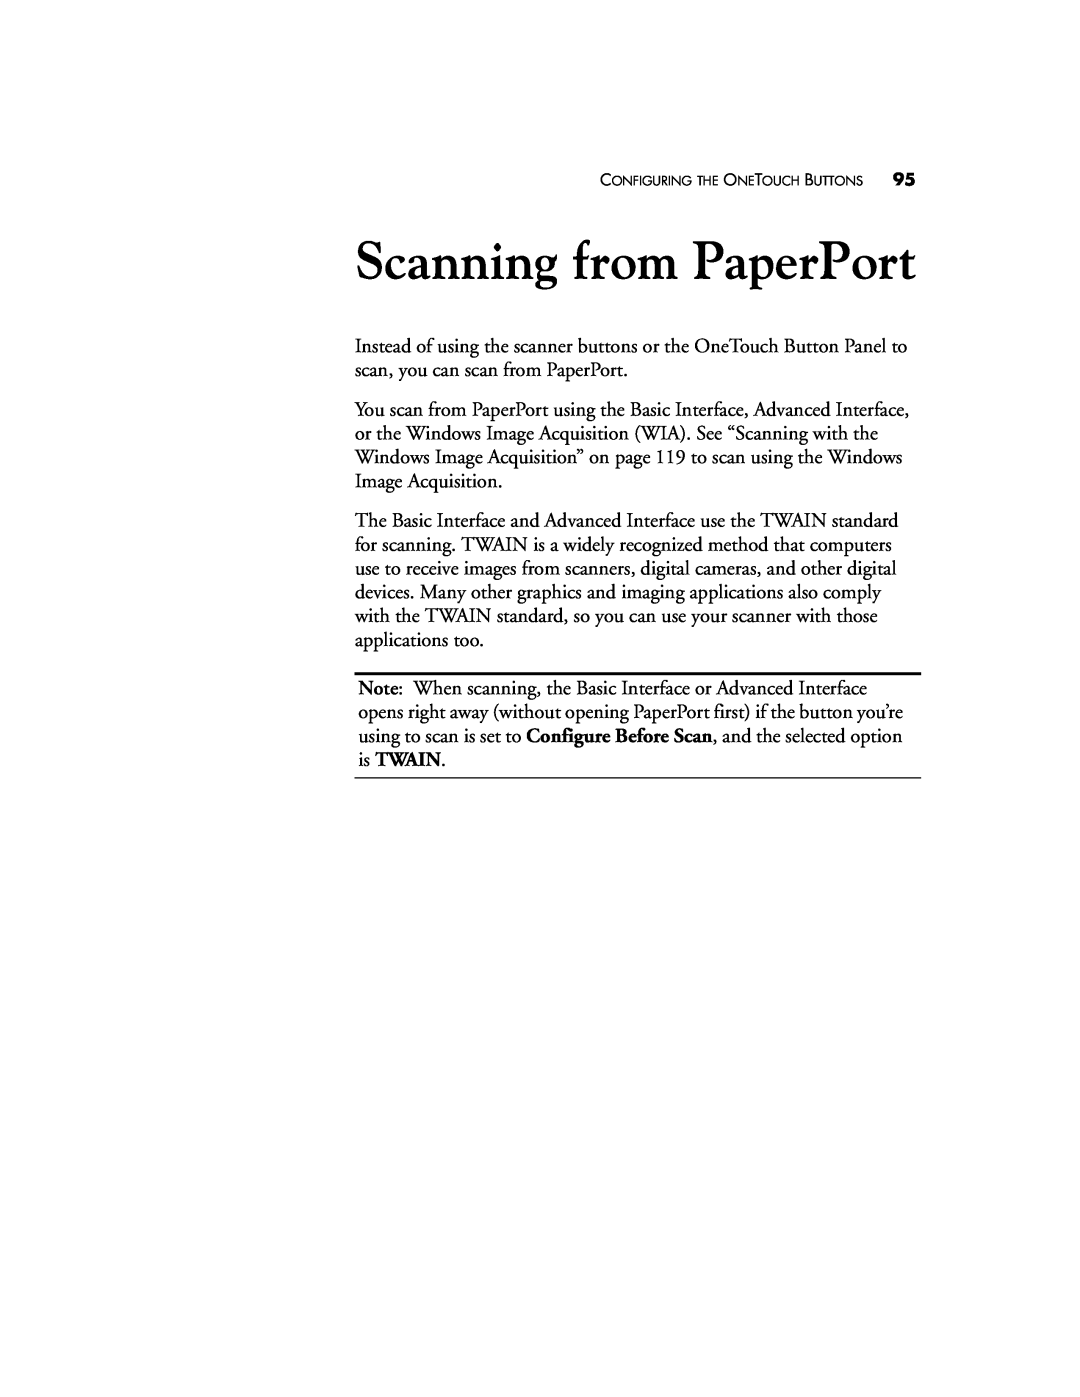 Visioneer XP 470 manual Scanning from PaperPort 